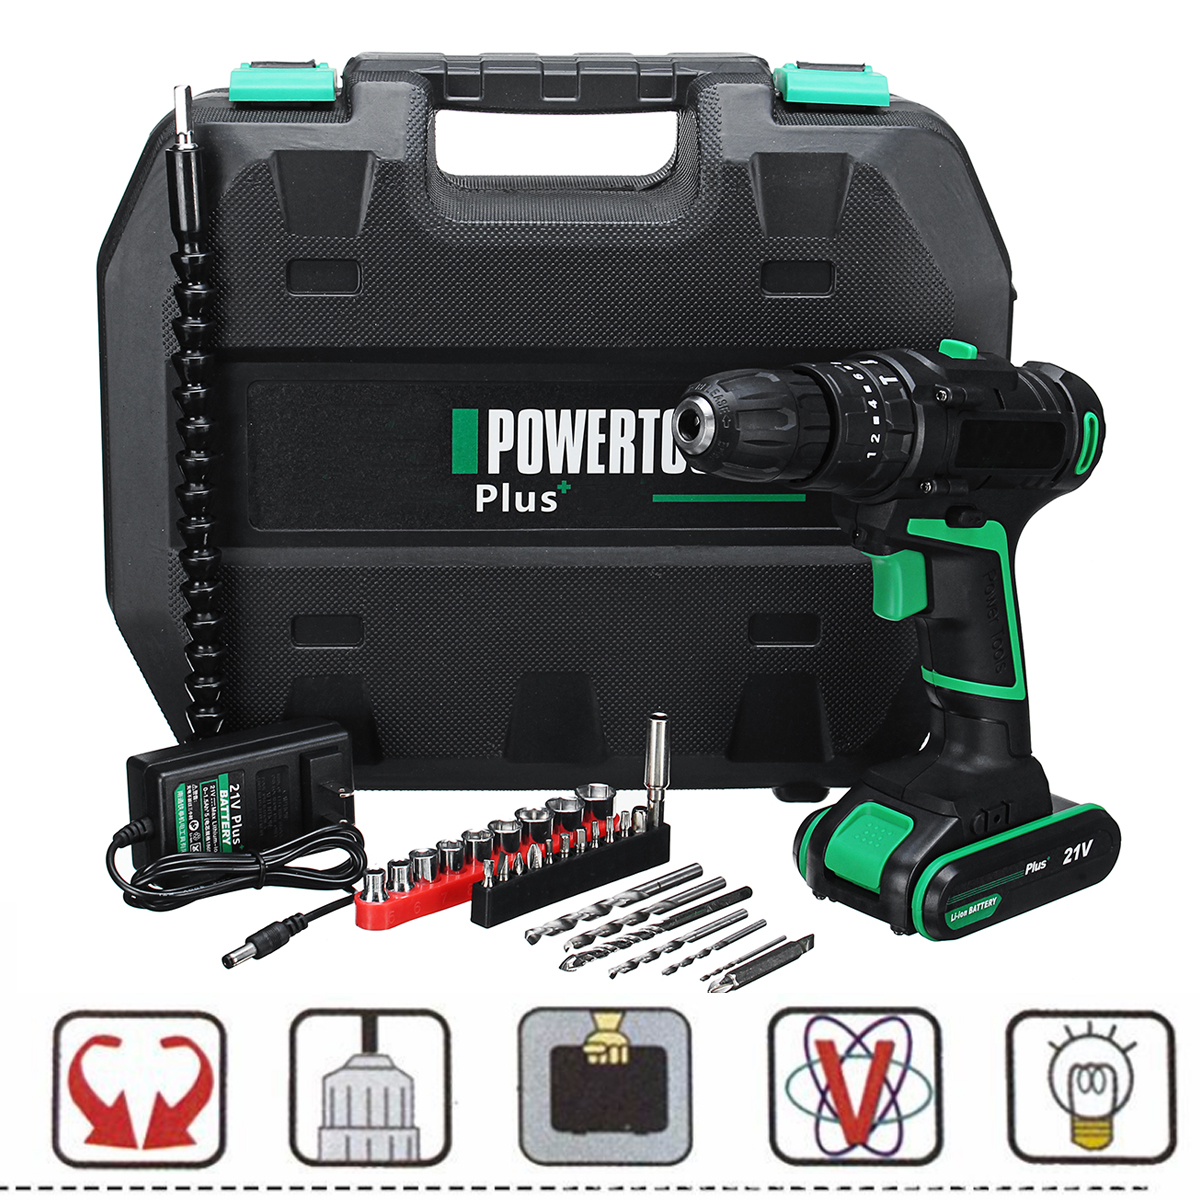 21V-Multi-function-Electric-Screwdriver-Rechargeable-Cordless-Power-Drilling-Tools-Power-Drills-1376917-3